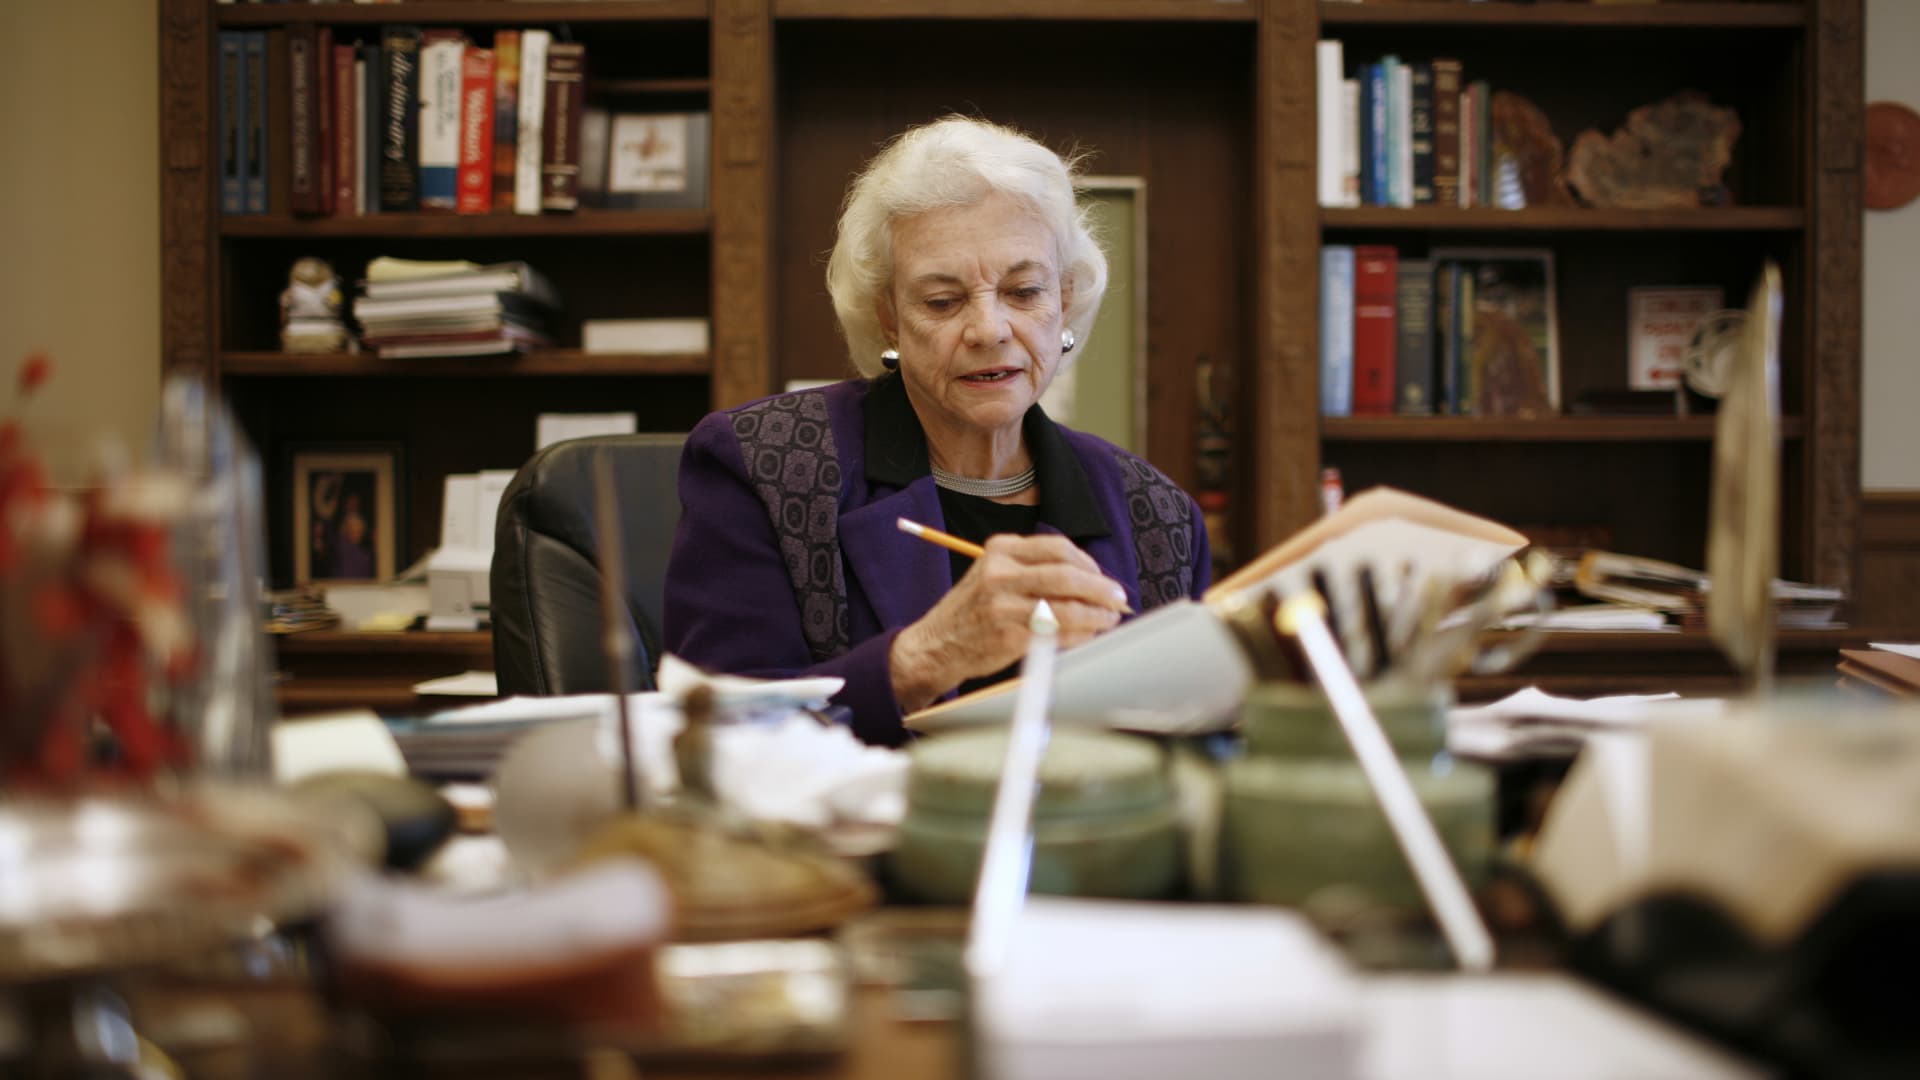 Iraq Study Group member and former Supreme Court Justice Sandra Day O'Connor in her offices at the United States Supreme Court on January 23, 2007 in Washington, D.C.